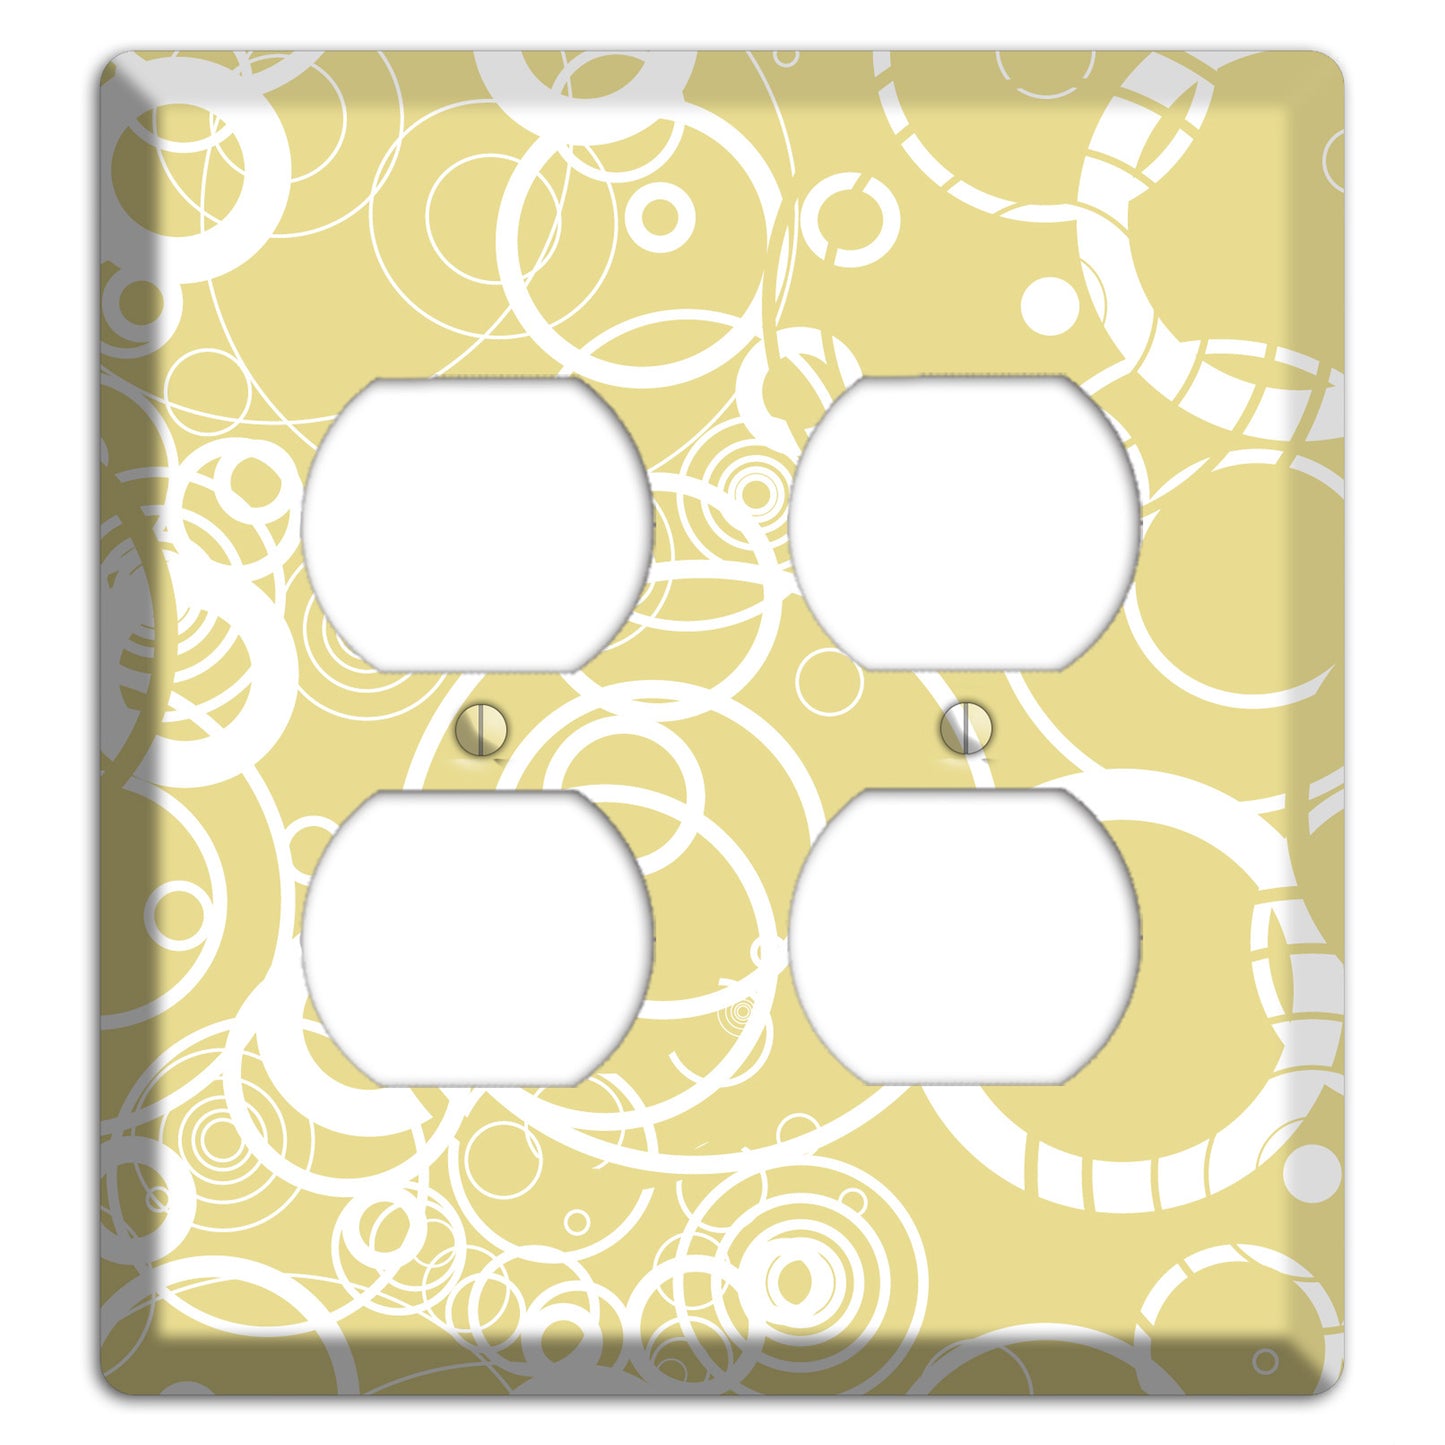 Beige with White Rings 2 Duplex Wallplate